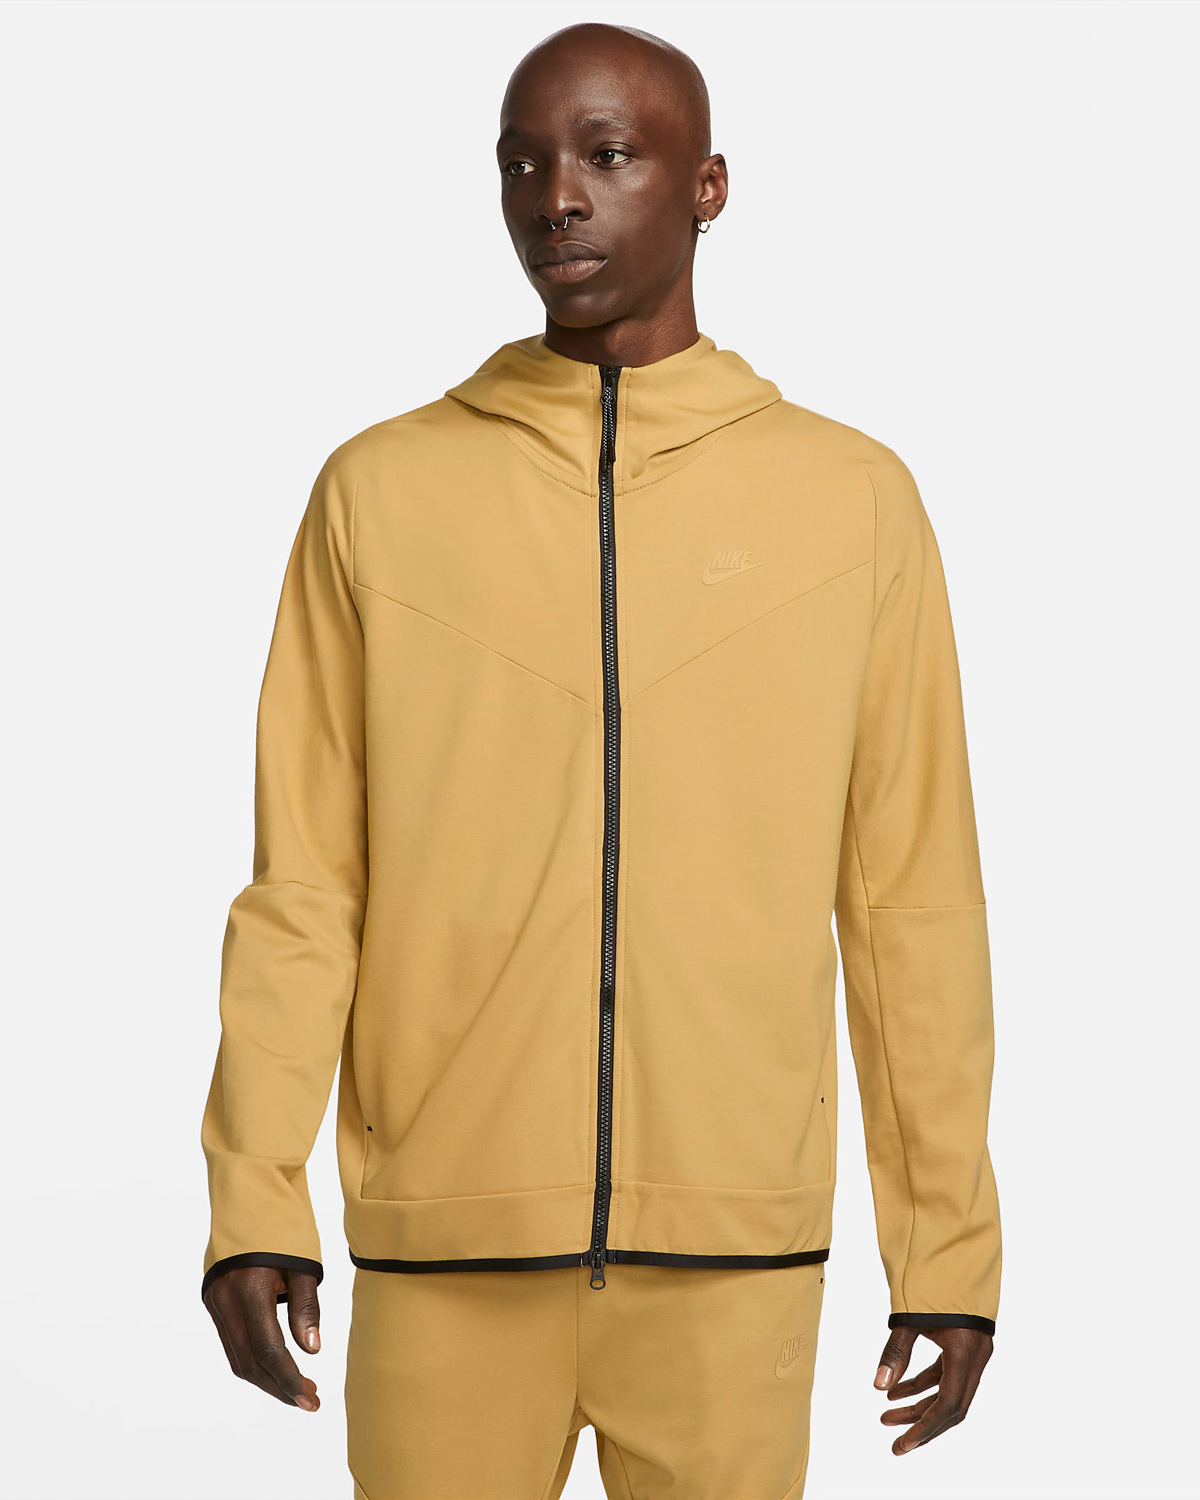 Nike Sportswear Wheat Gold Shirts Clothing Sneaker Outfits